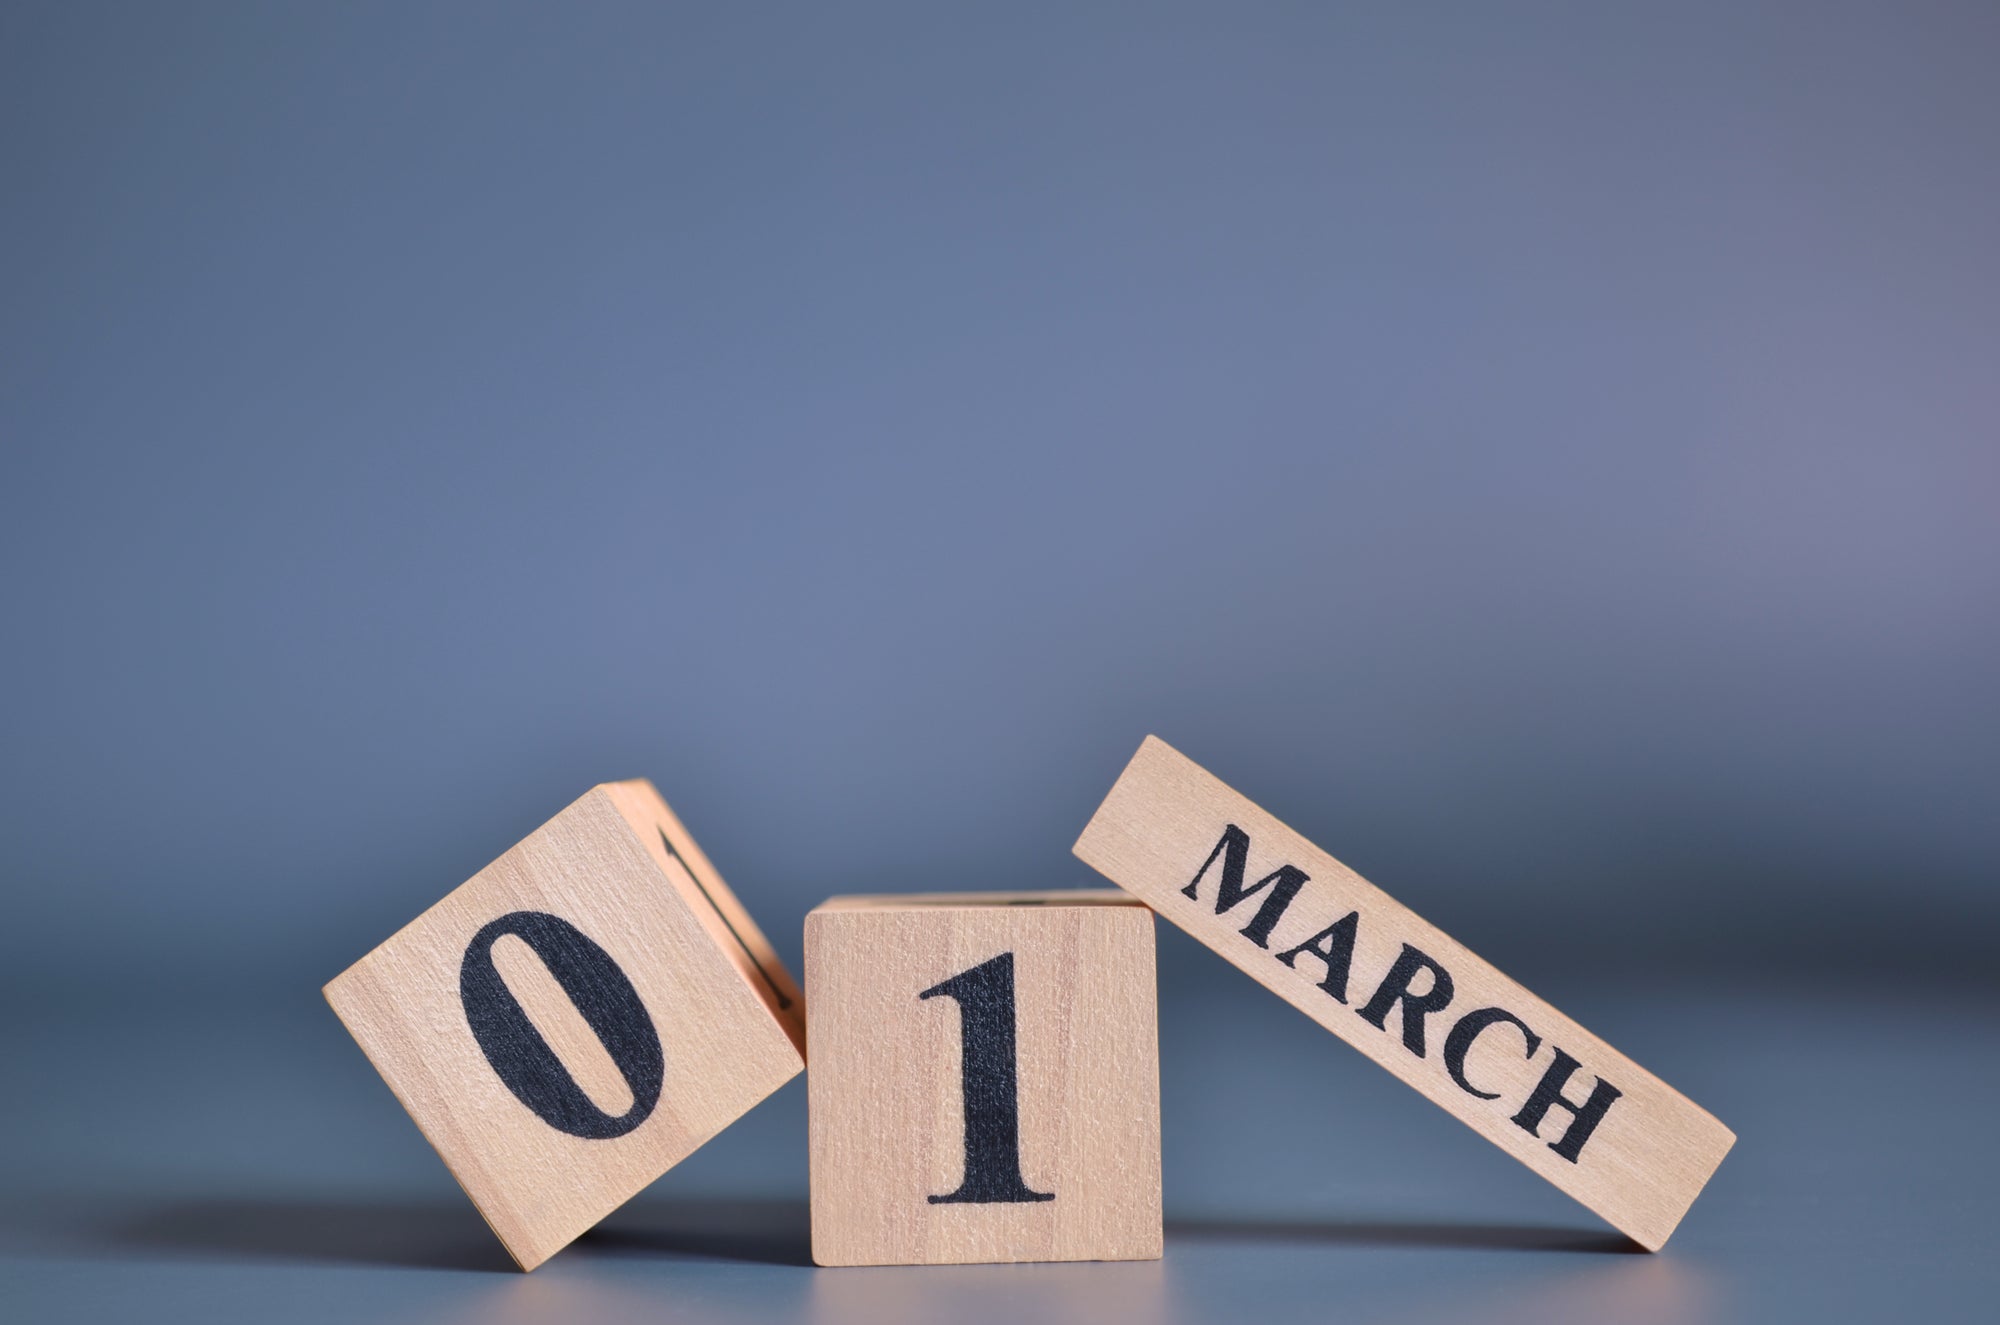 March 1, 2023 Sales and/or Use Tax Changes